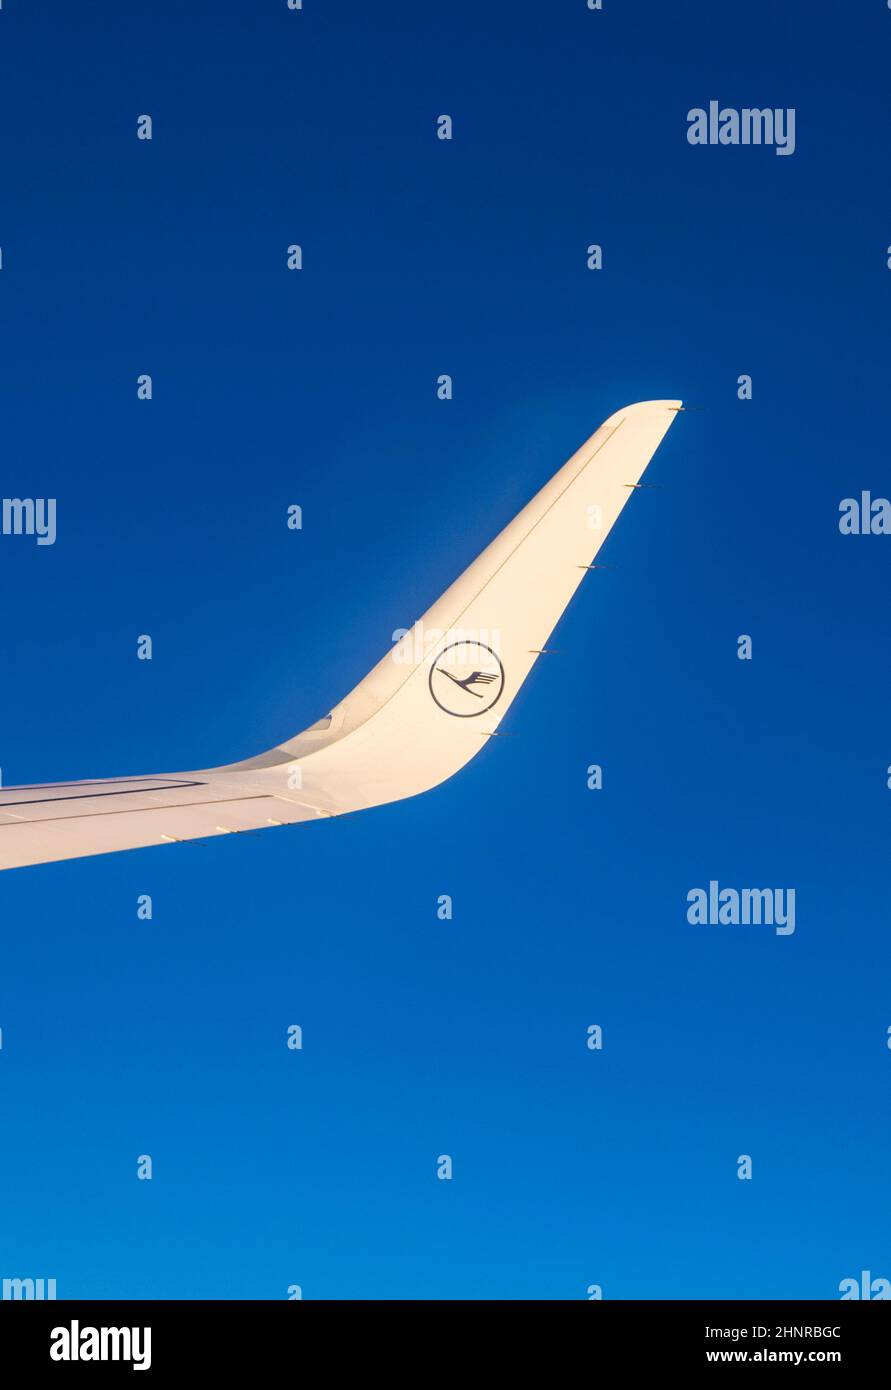 wing of aircraft with lufthansa logo flying in the sunset sky Stock Photo